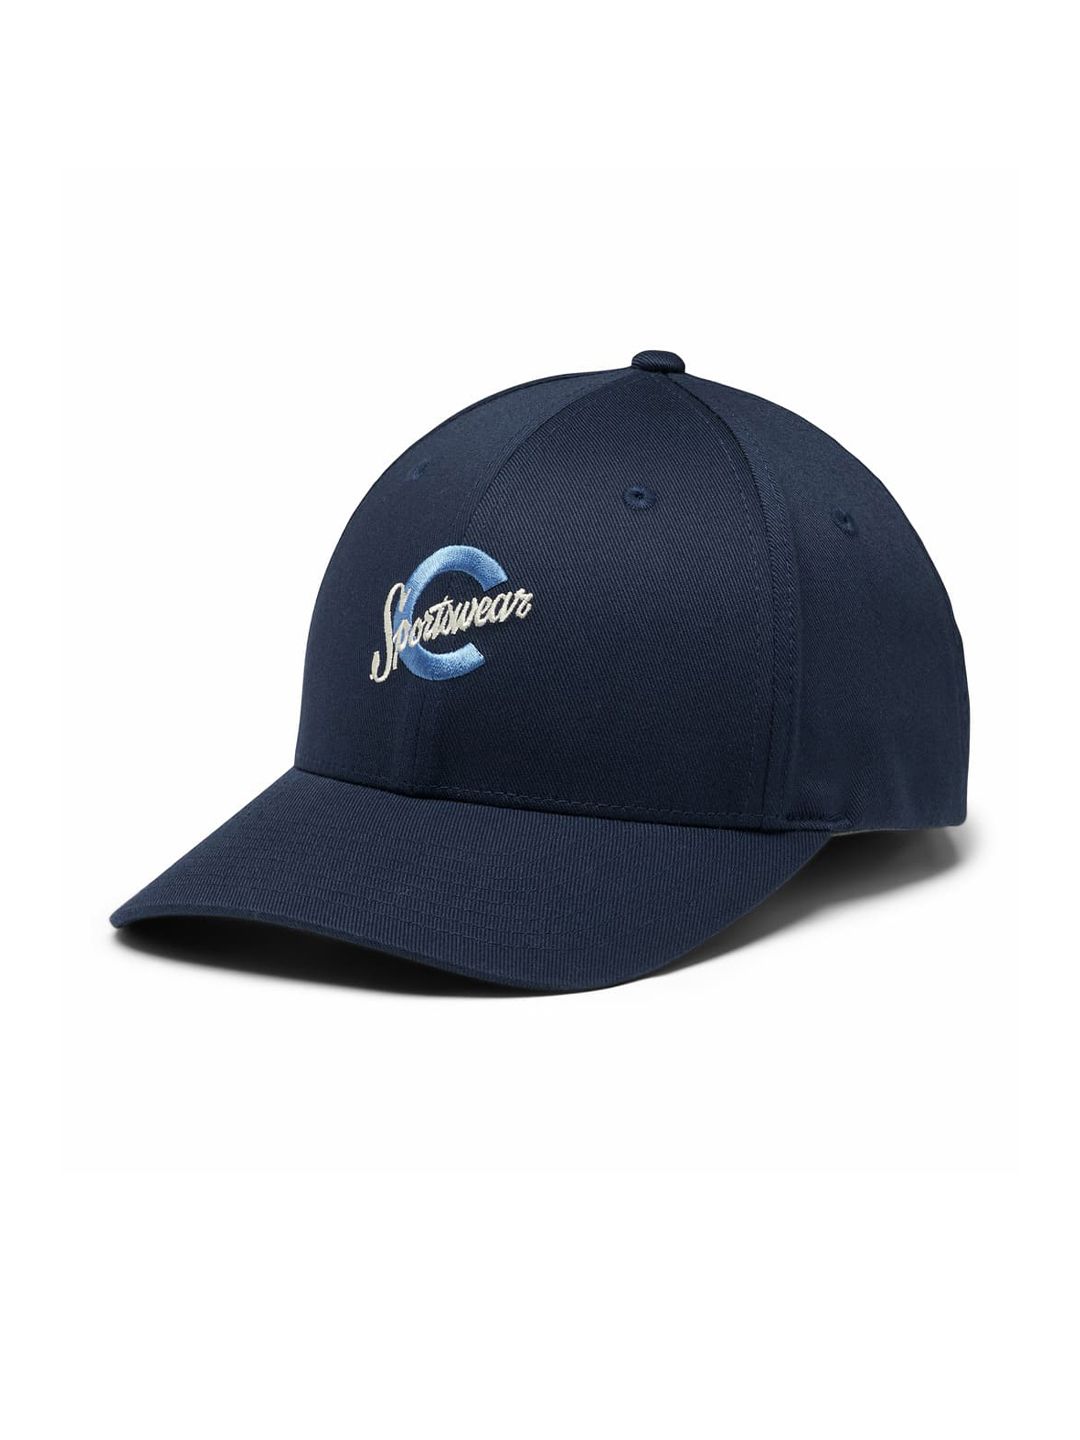 Columbia Unisex Blue Embroidered Baseball Cap Price in India